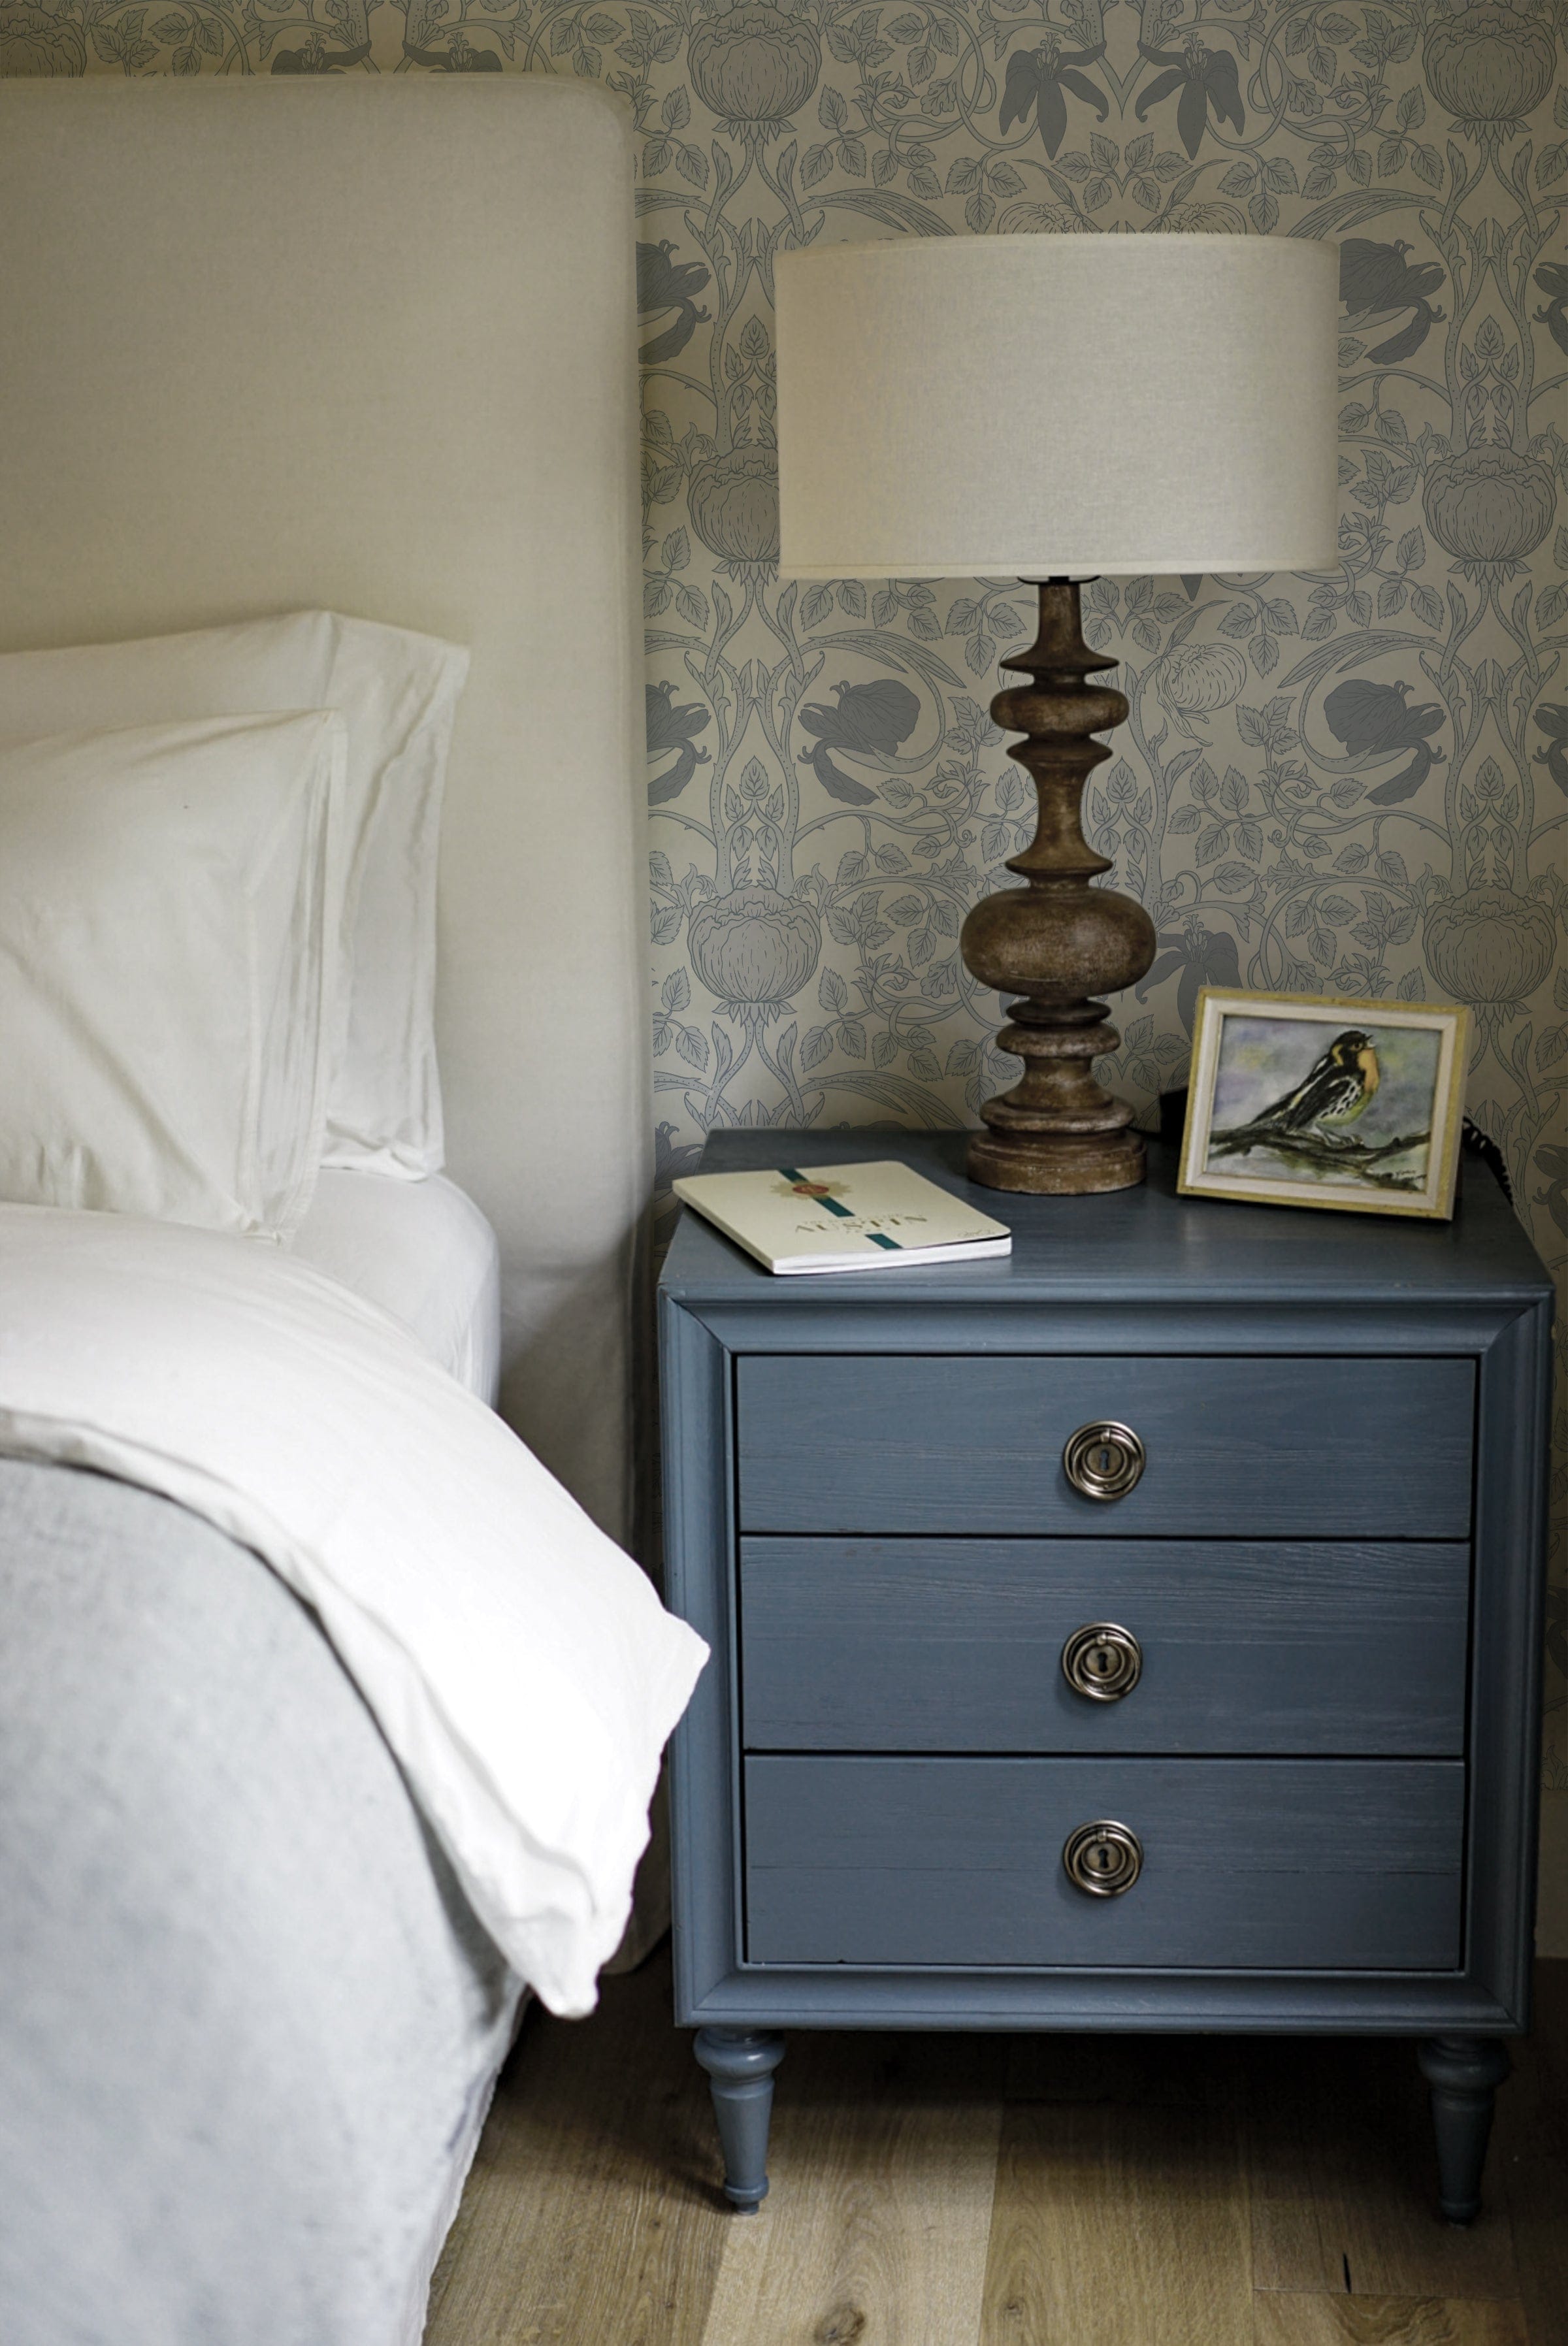 Vintage Floral Damask Wallpaper with an intricate blue floral pattern on a white background, enhancing the wall behind a blue bedside table with a lamp and a framed bird illustration in a cozy bedroom setting